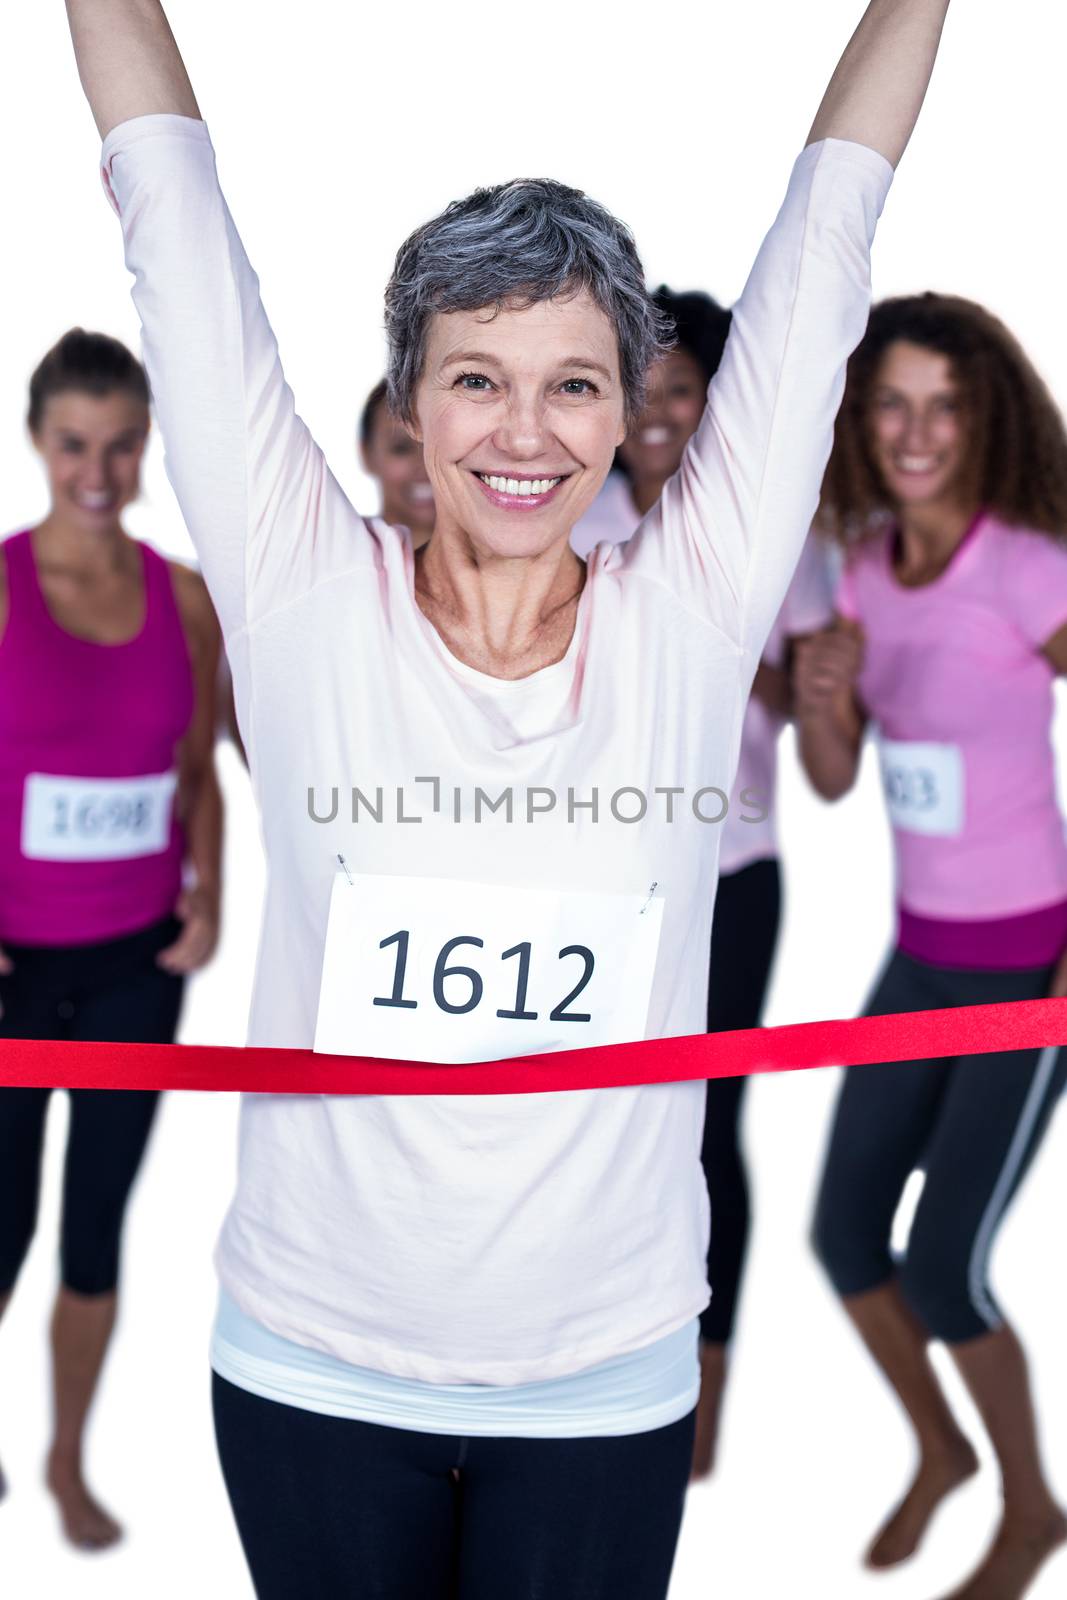 Portrait of happy winner athlete crossing finish line with arms raised against white background